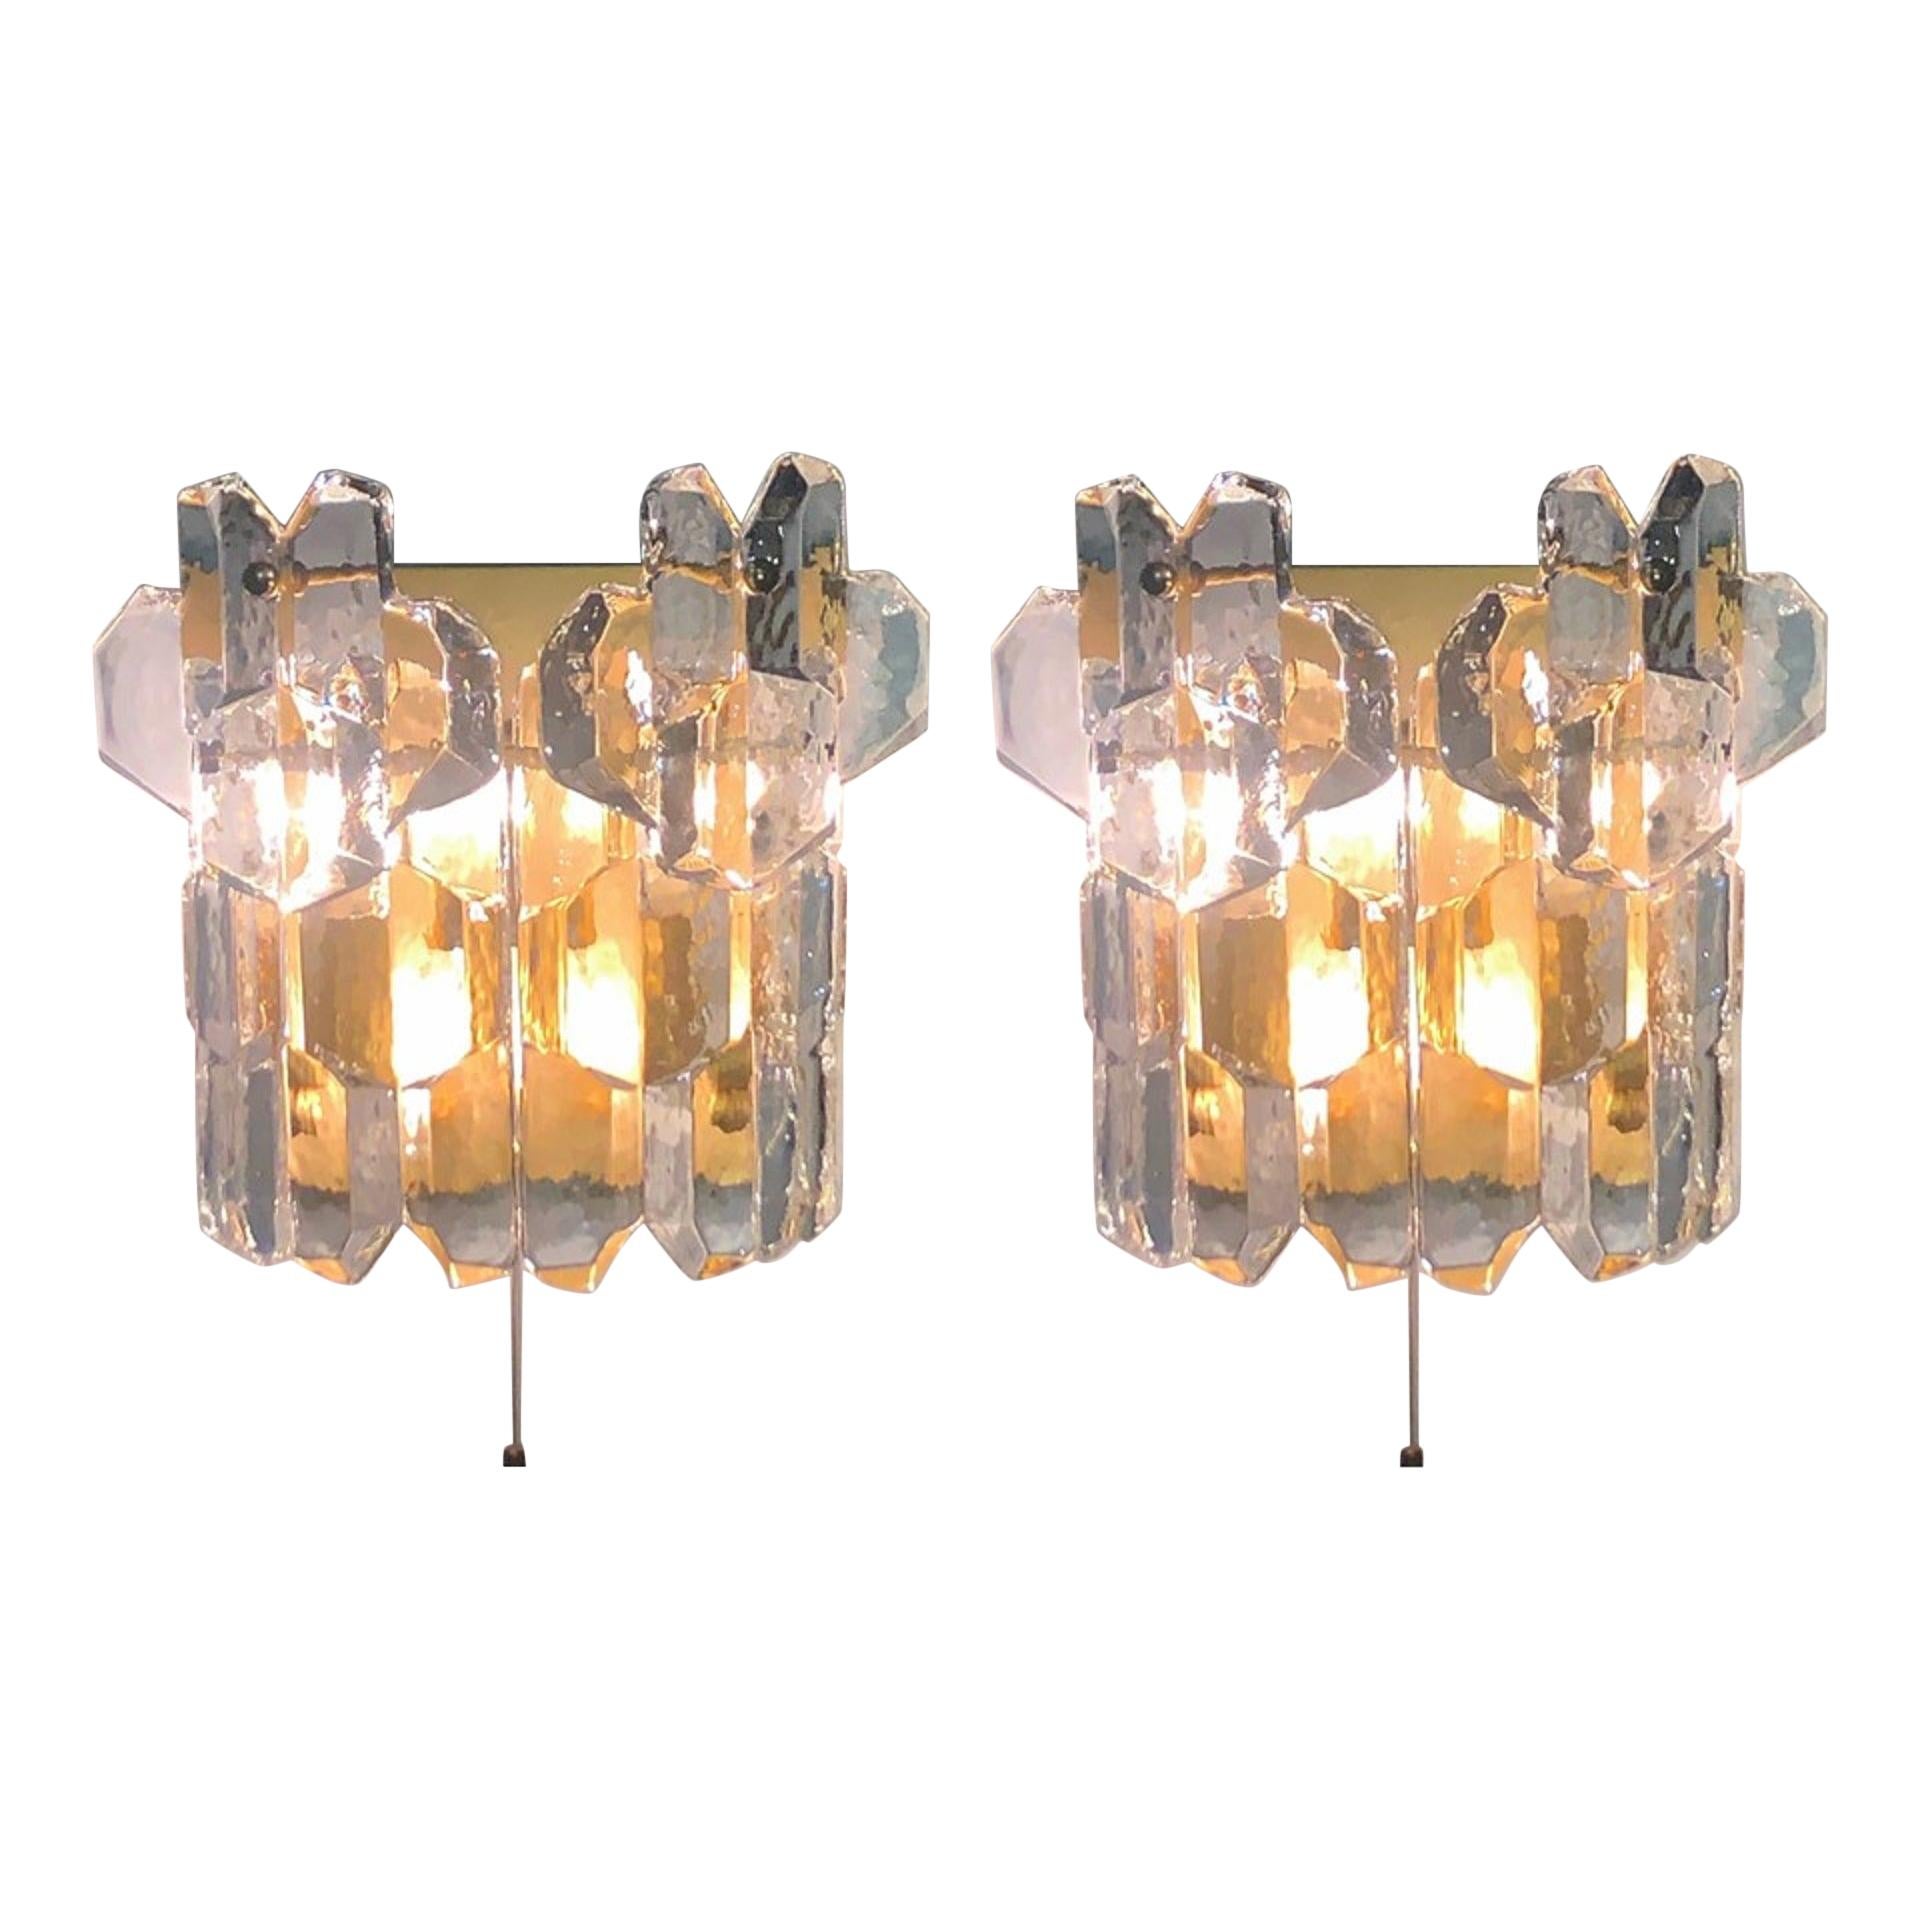 Pair of Grand J.T. Kalmar "Palazzo" Wall Sconces, Vienna, 1960s For Sale